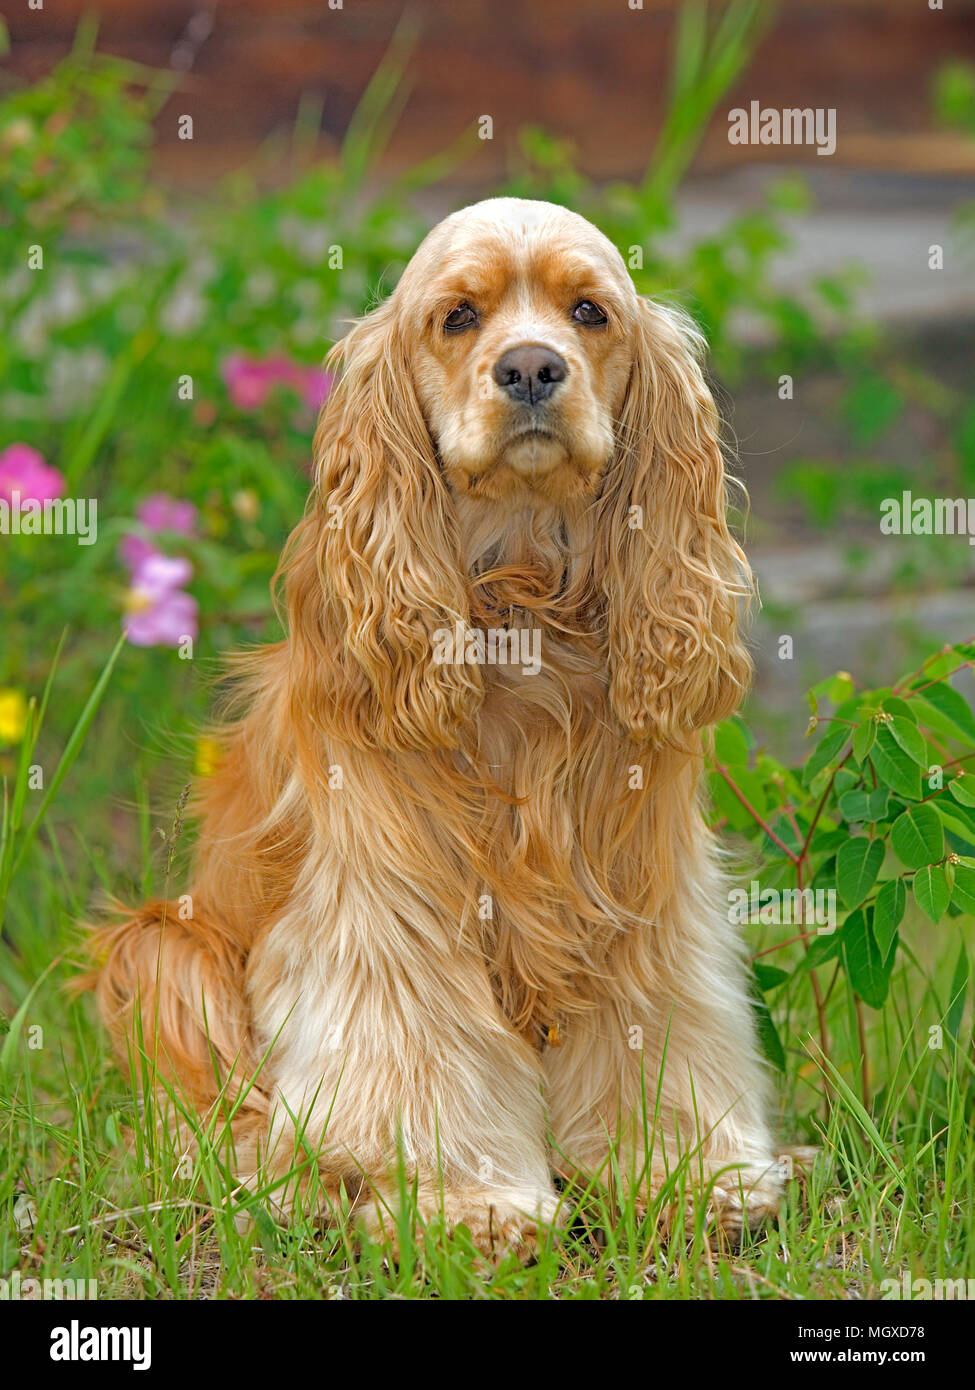 Cocker Spaniel sitting outside by flowers, looking at camera. Stock Photo